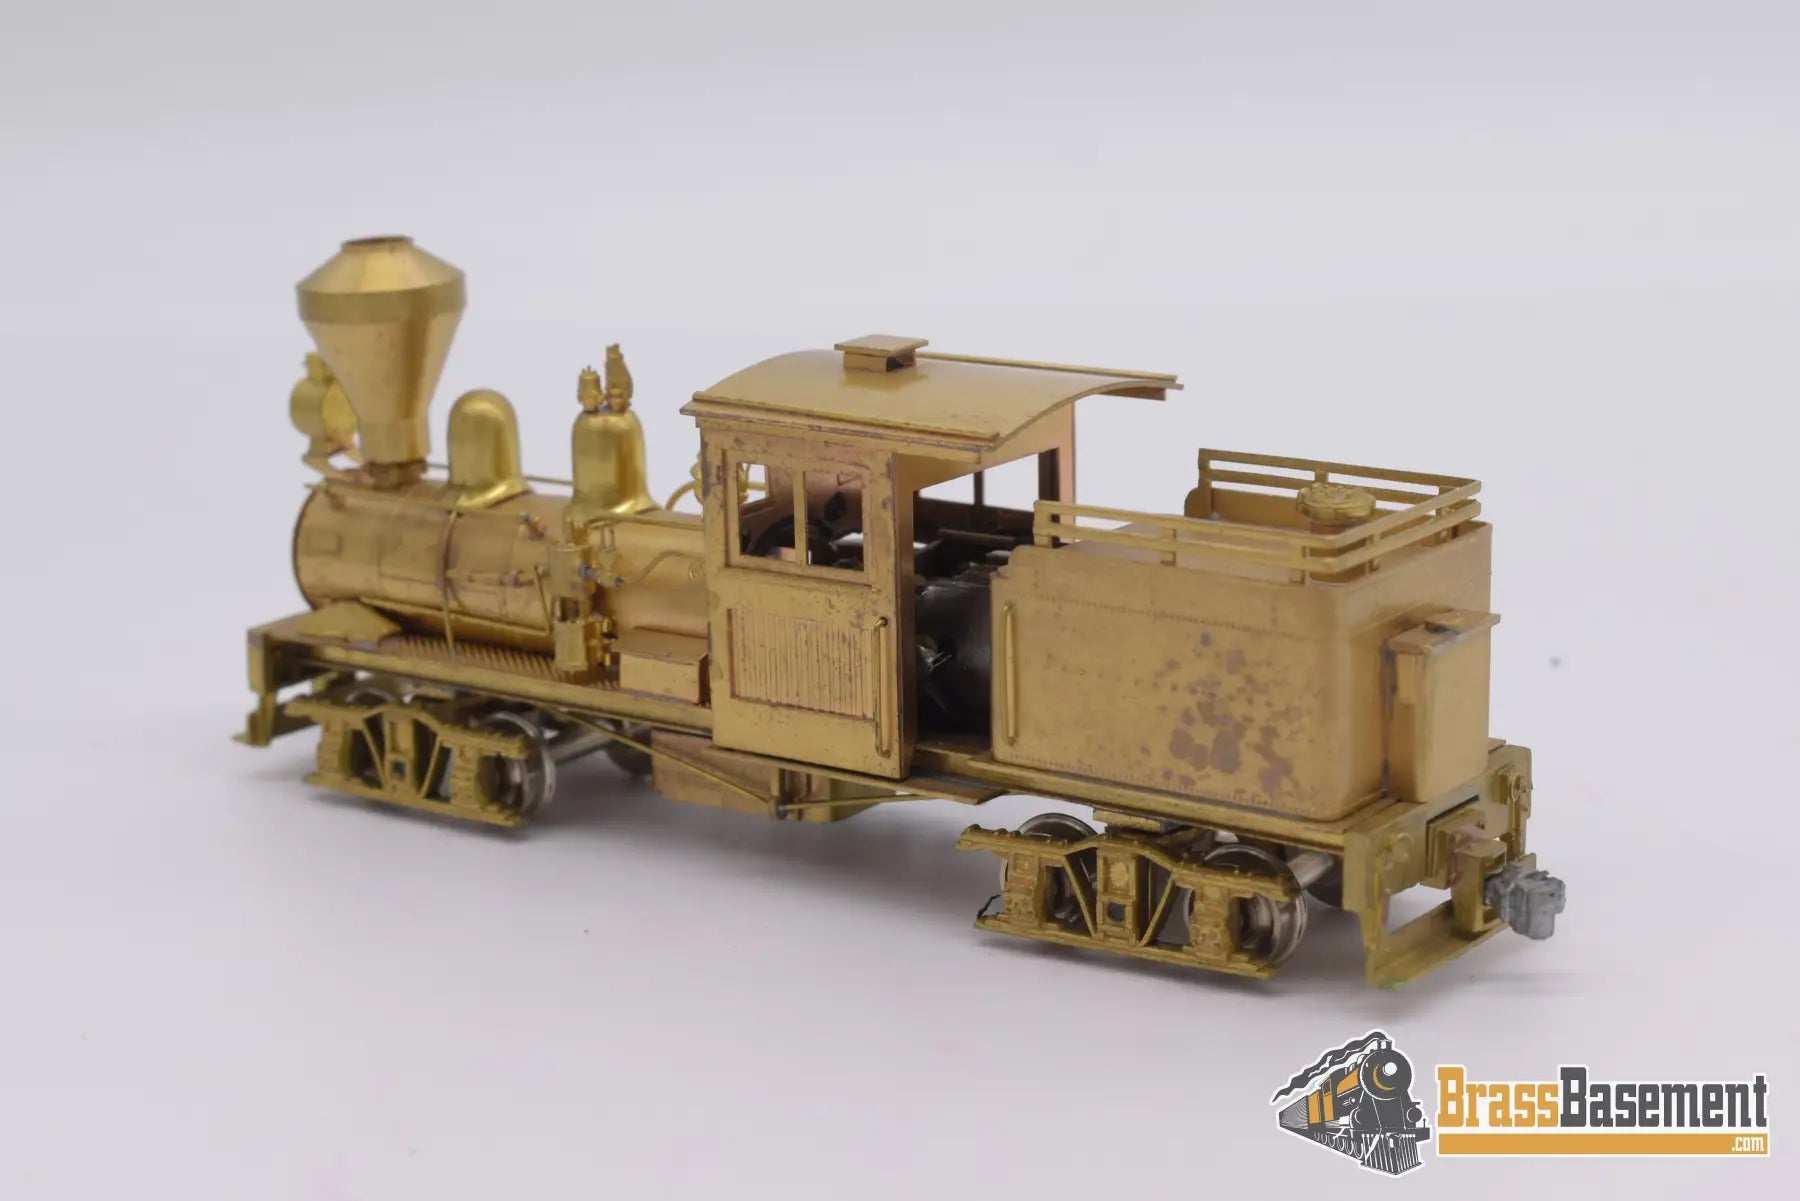 Ho Brass - Westside Class A 20 - Ton Shay Unpainted/Excellent Runner Steam